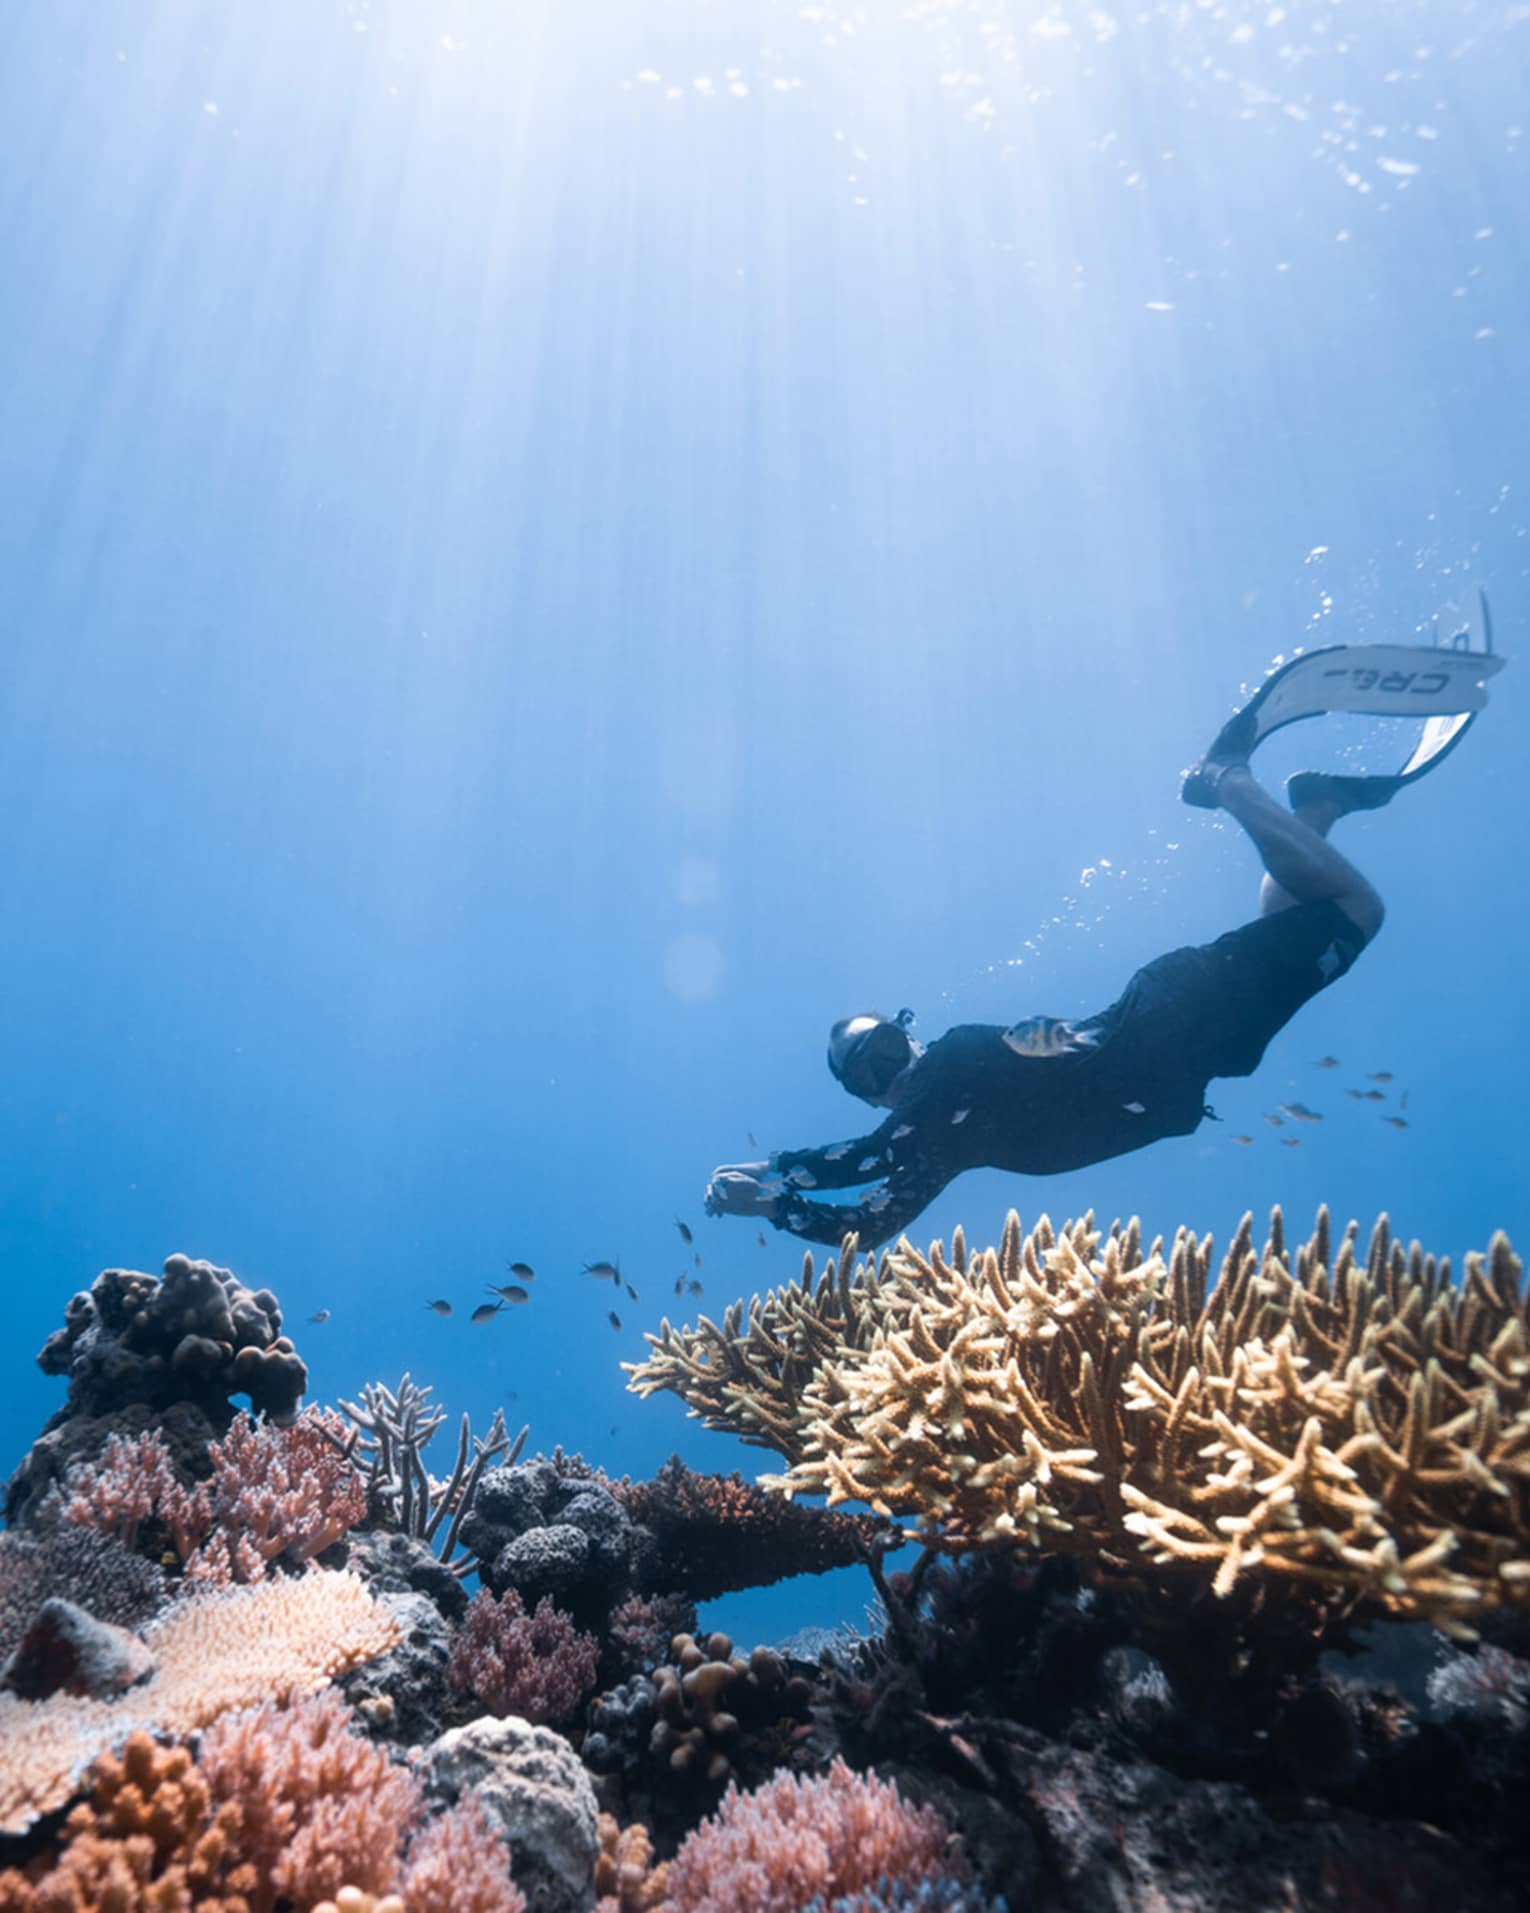 ,A person scuba dives over a colorful coral reef